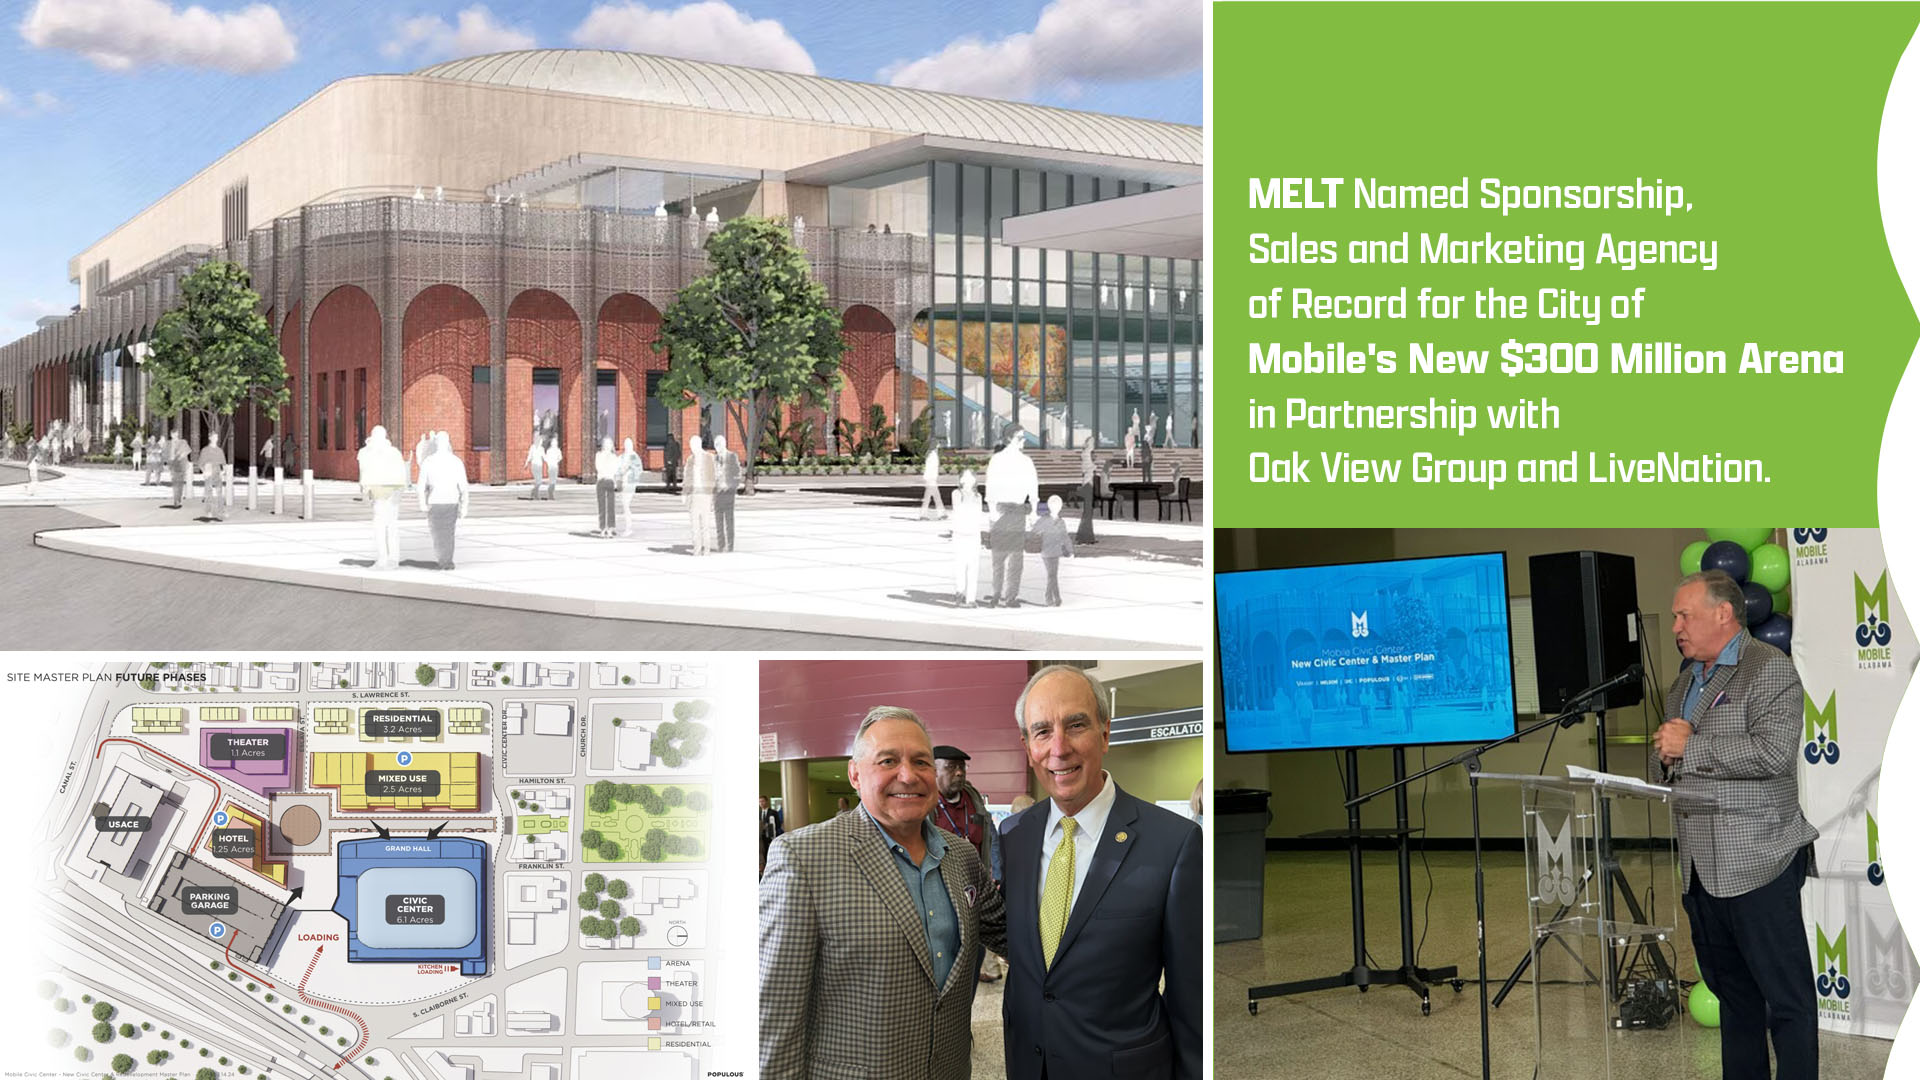 MELT Named Sponsorship, Sales and Marketing Agency of Record for the City of Mobile’s New $300 Million Arena in Partnership with Oak View Group and LiveNation.